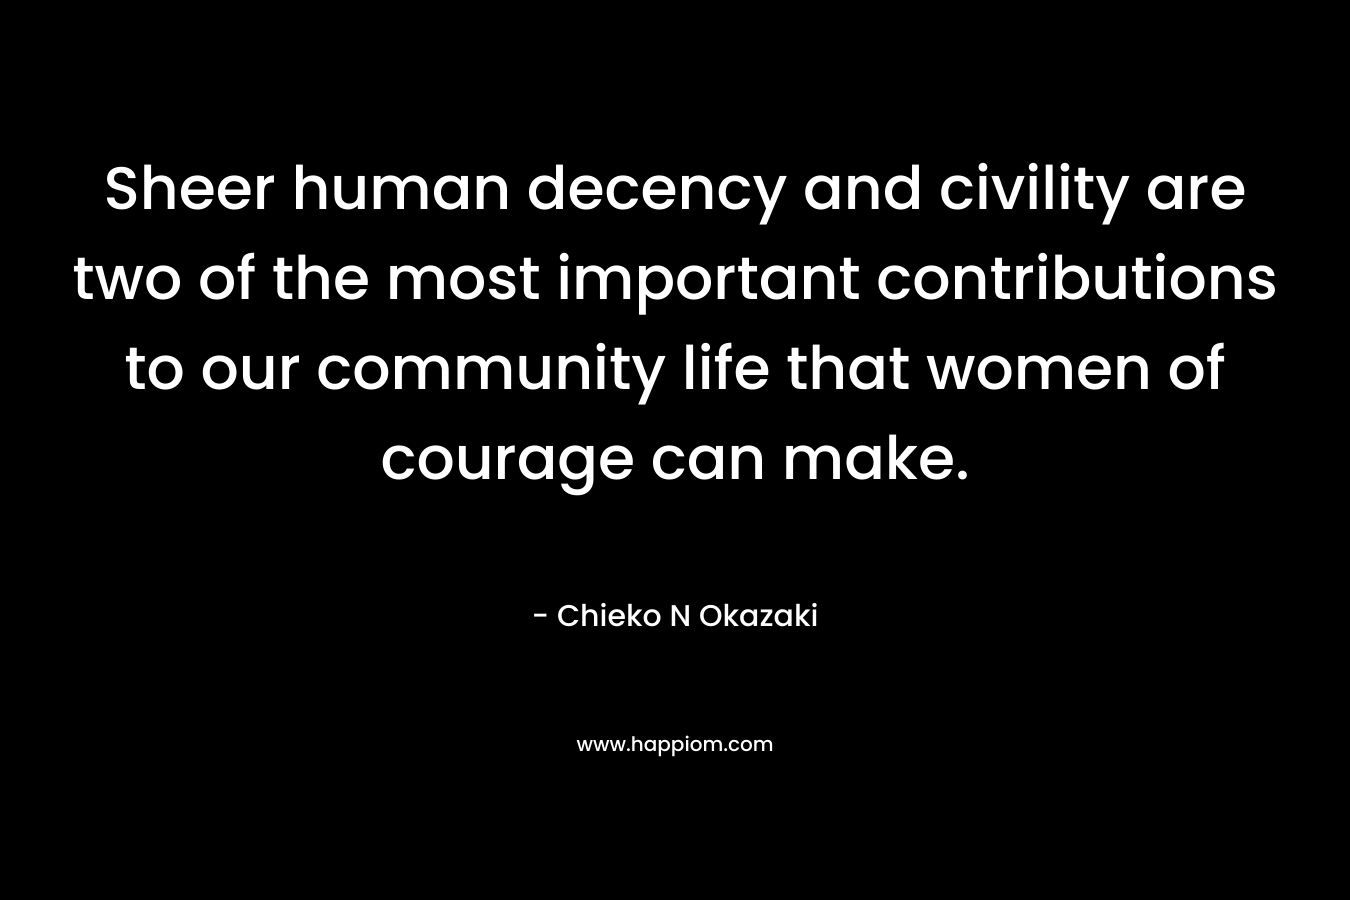 Sheer human decency and civility are two of the most important contributions to our community life that women of courage can make. – Chieko N Okazaki